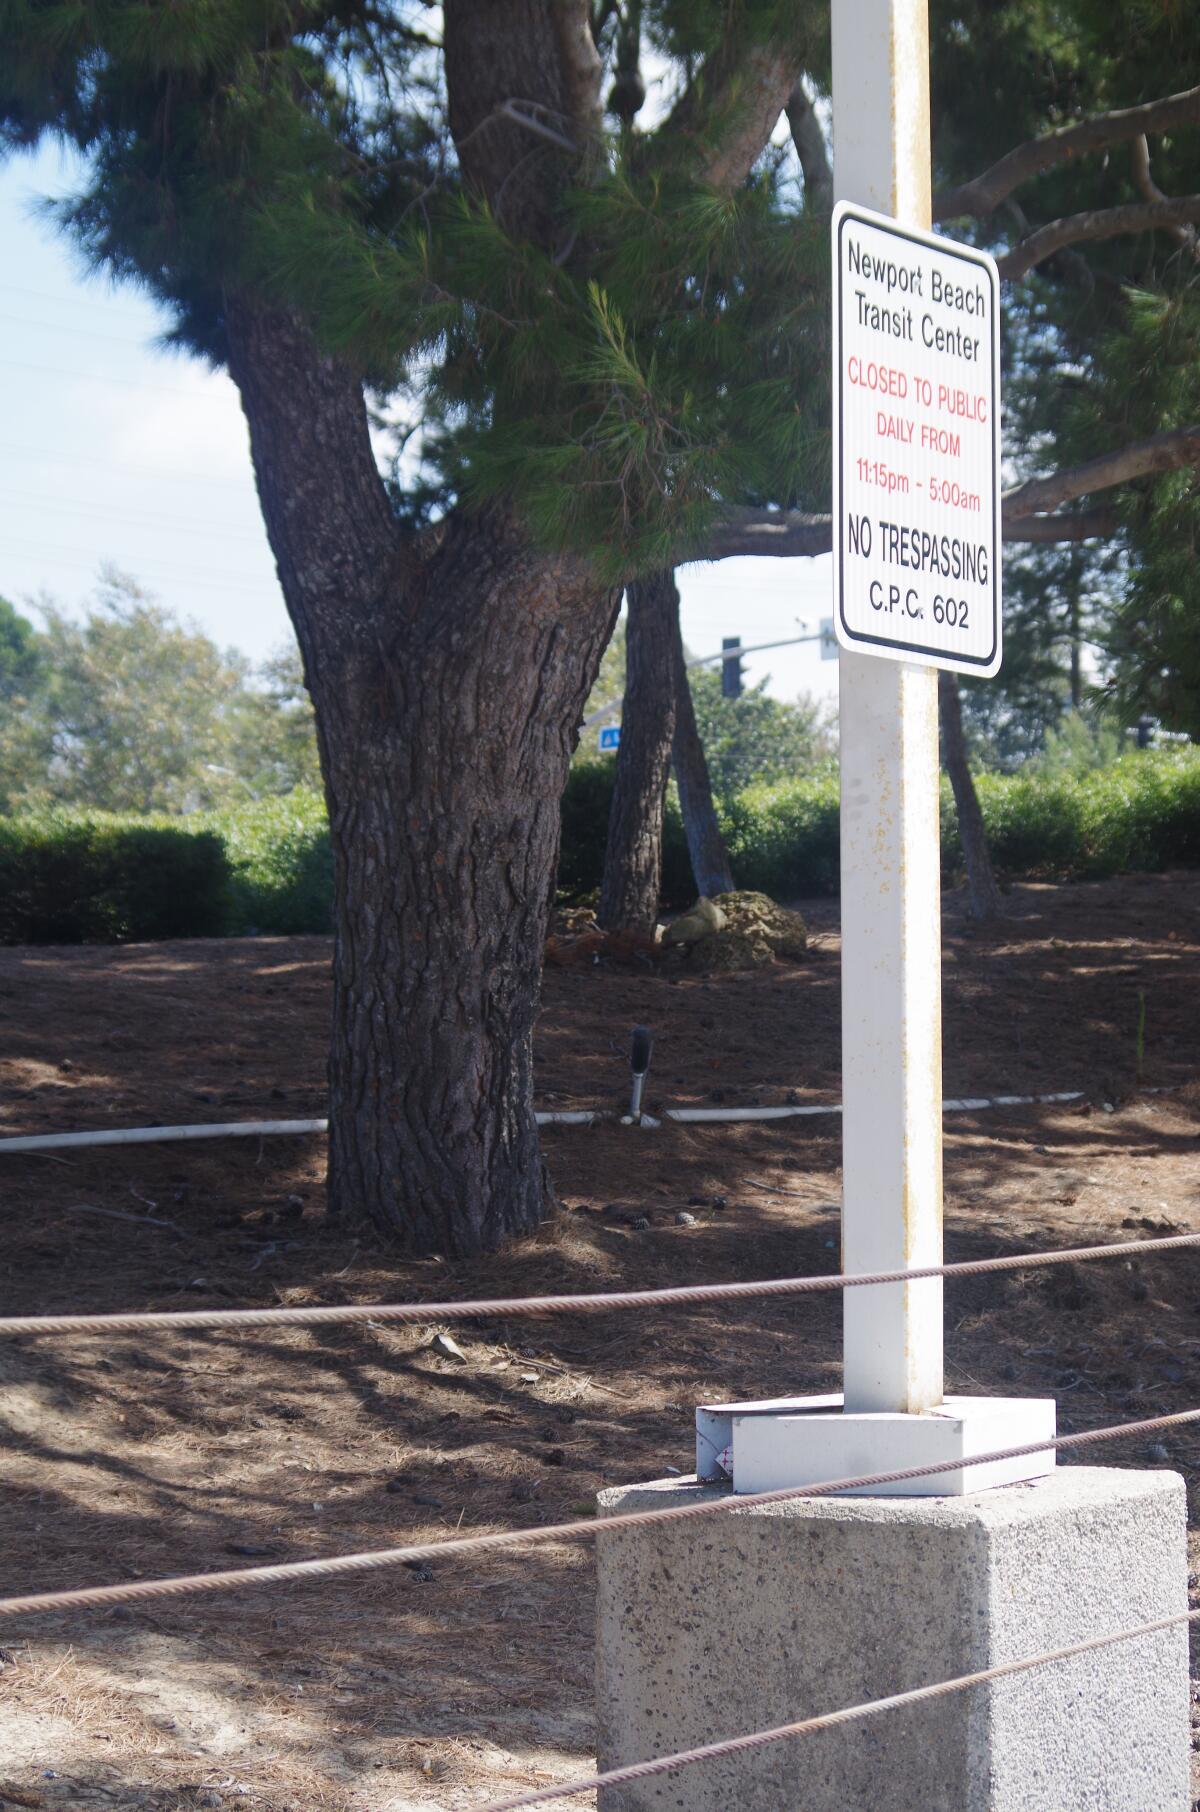 A new "No trespassing" sign at the Newport Beach transit center on Avocado Avenue posts the hours the station is closed to the public. Tents housing homeless people were on the slope behind the sign until police removed them late Wednesday.